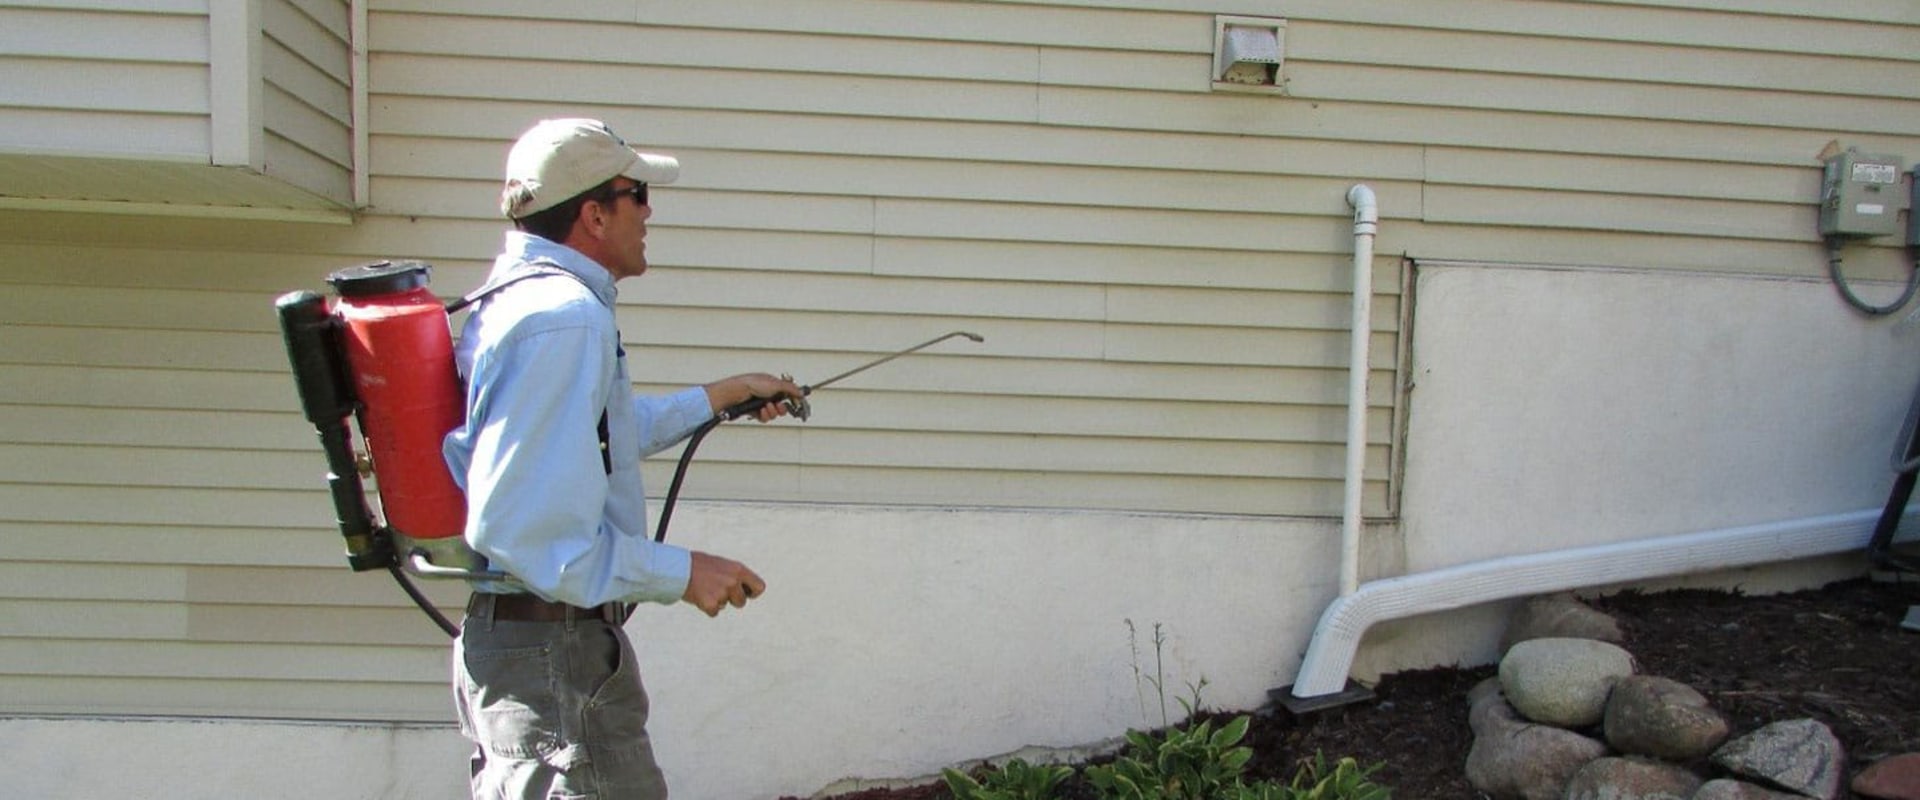 Should pest control spray inside or outside?